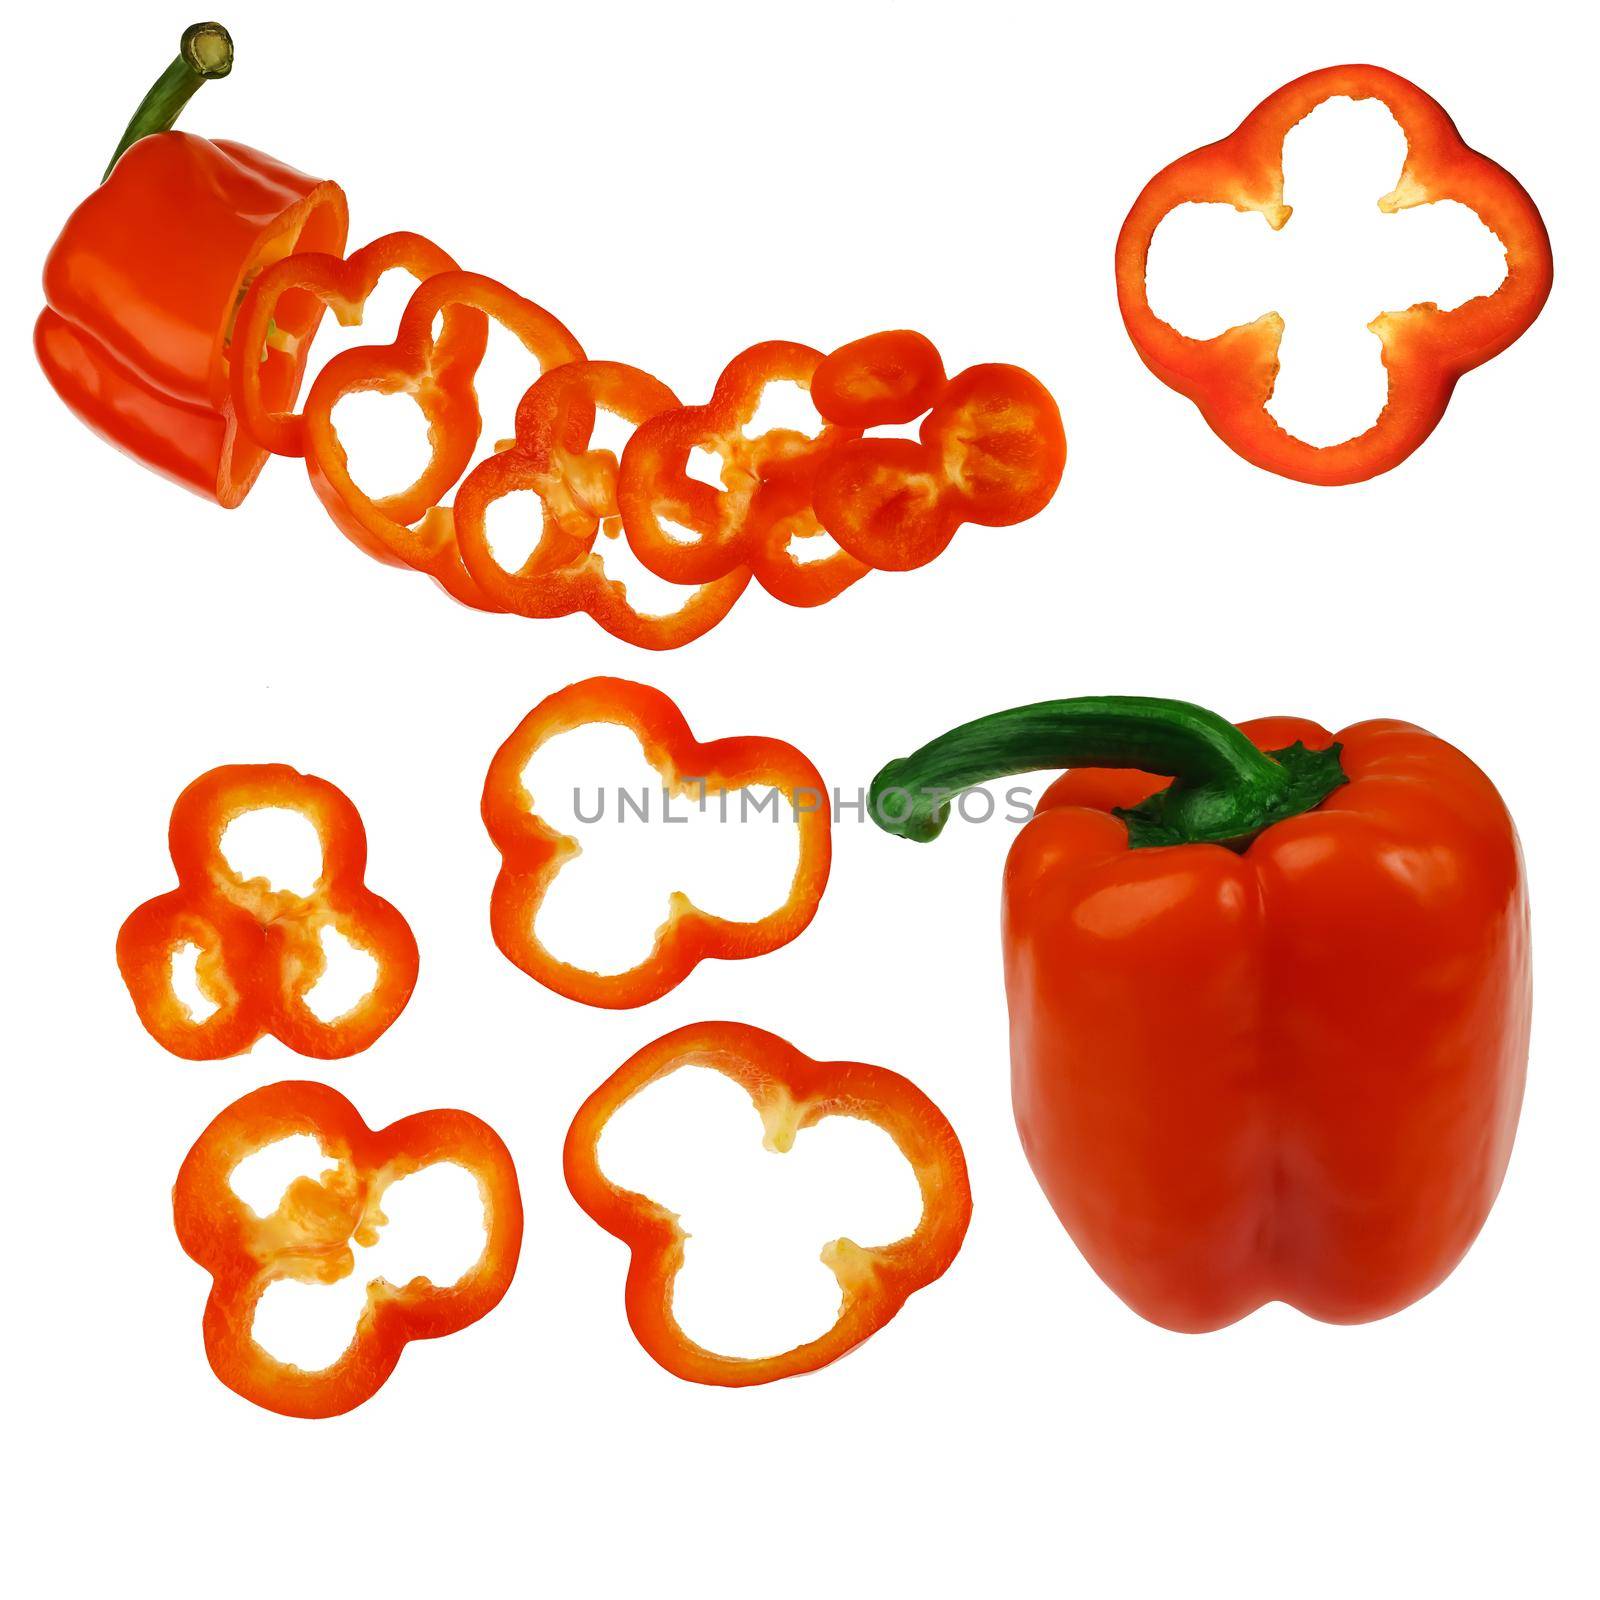 ripe sweet red pepper, cut into pieces and whole, on a white background, collage